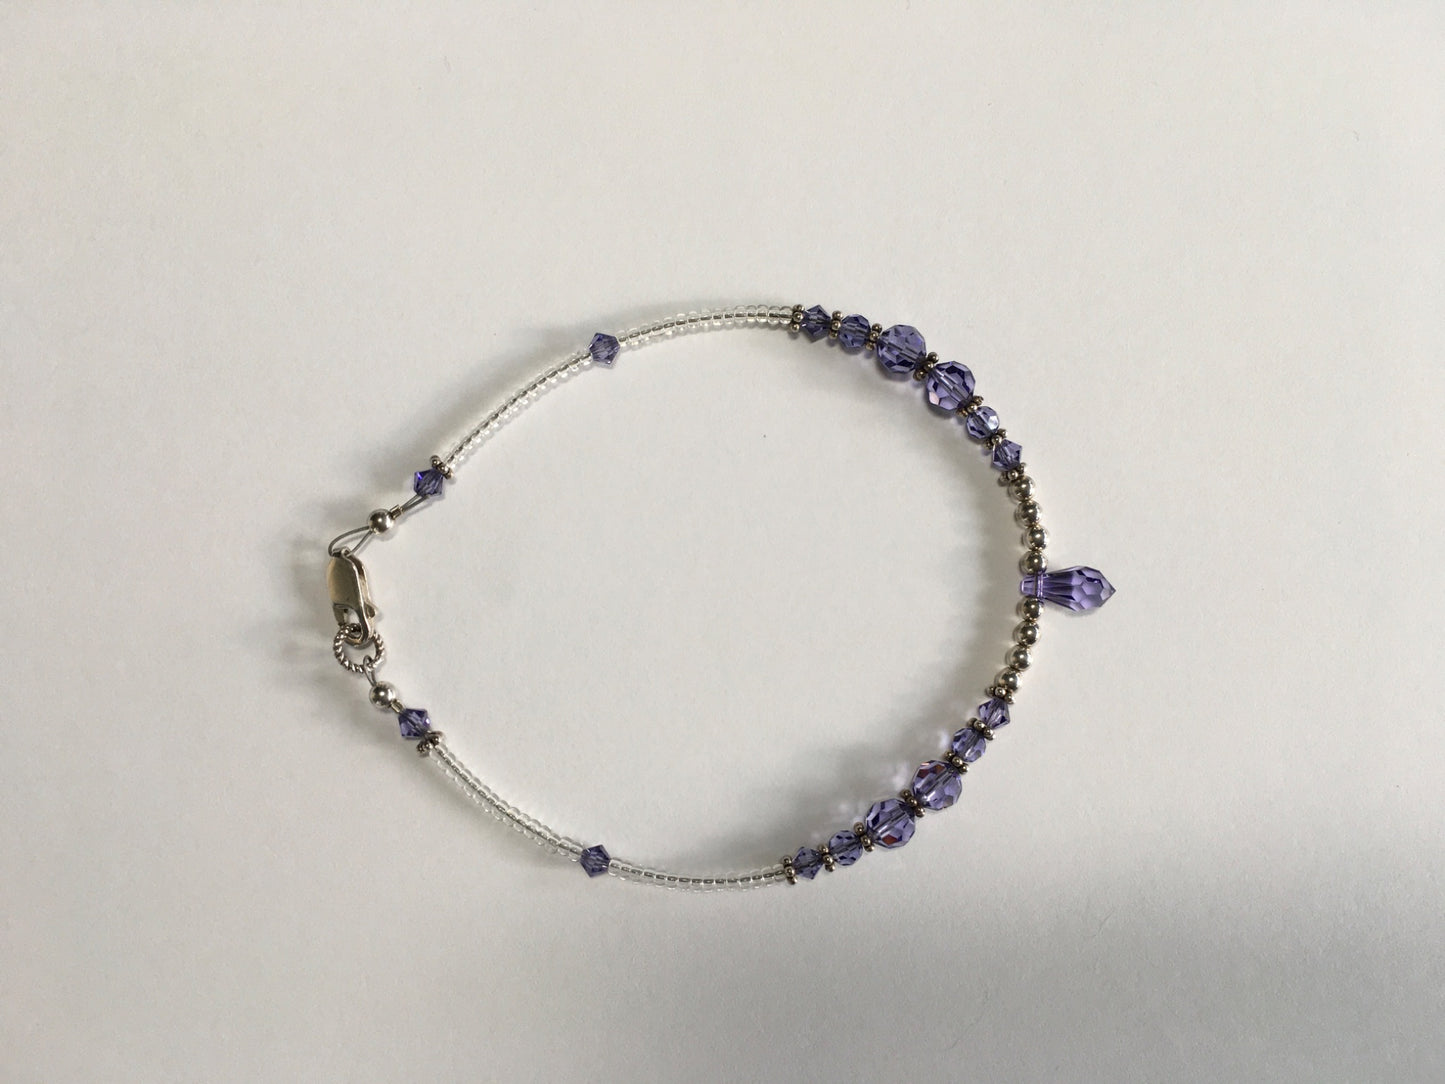 Anklets, Made with Sterling Silver and Swarovski Crystals  - 2